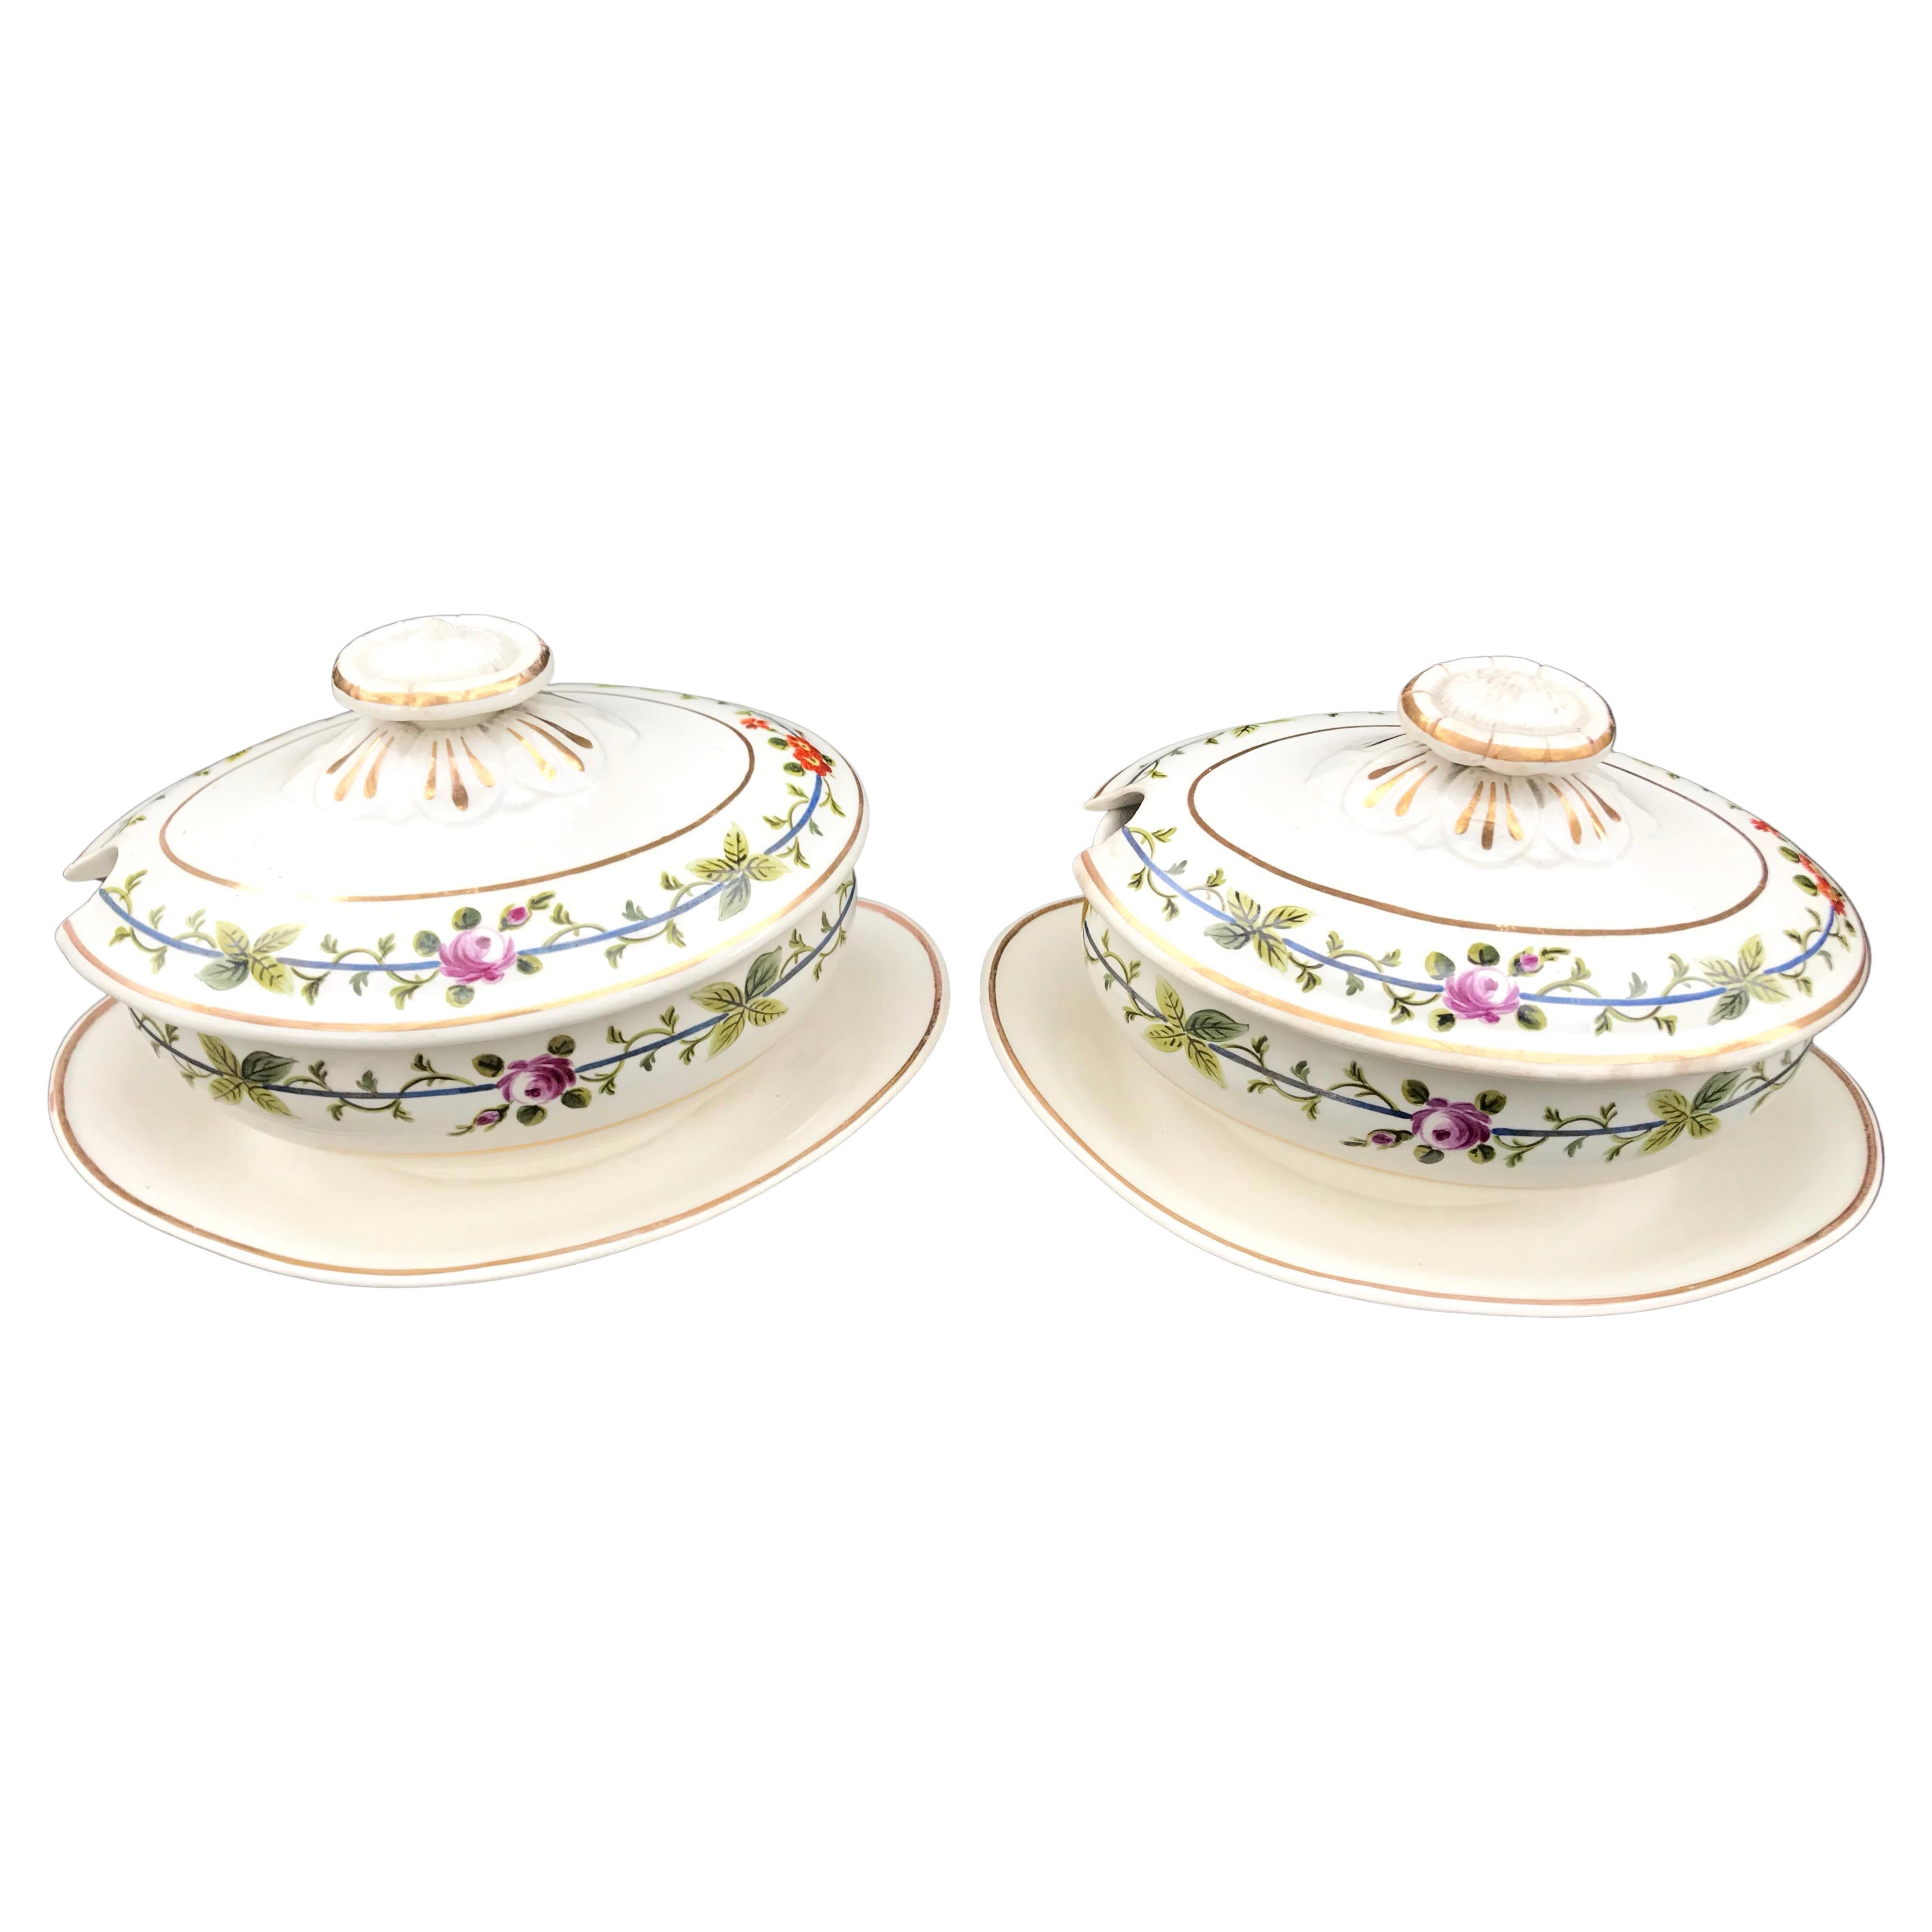 Pair of Wedgwood Creamware Floral Banded Sauceboats For Sale